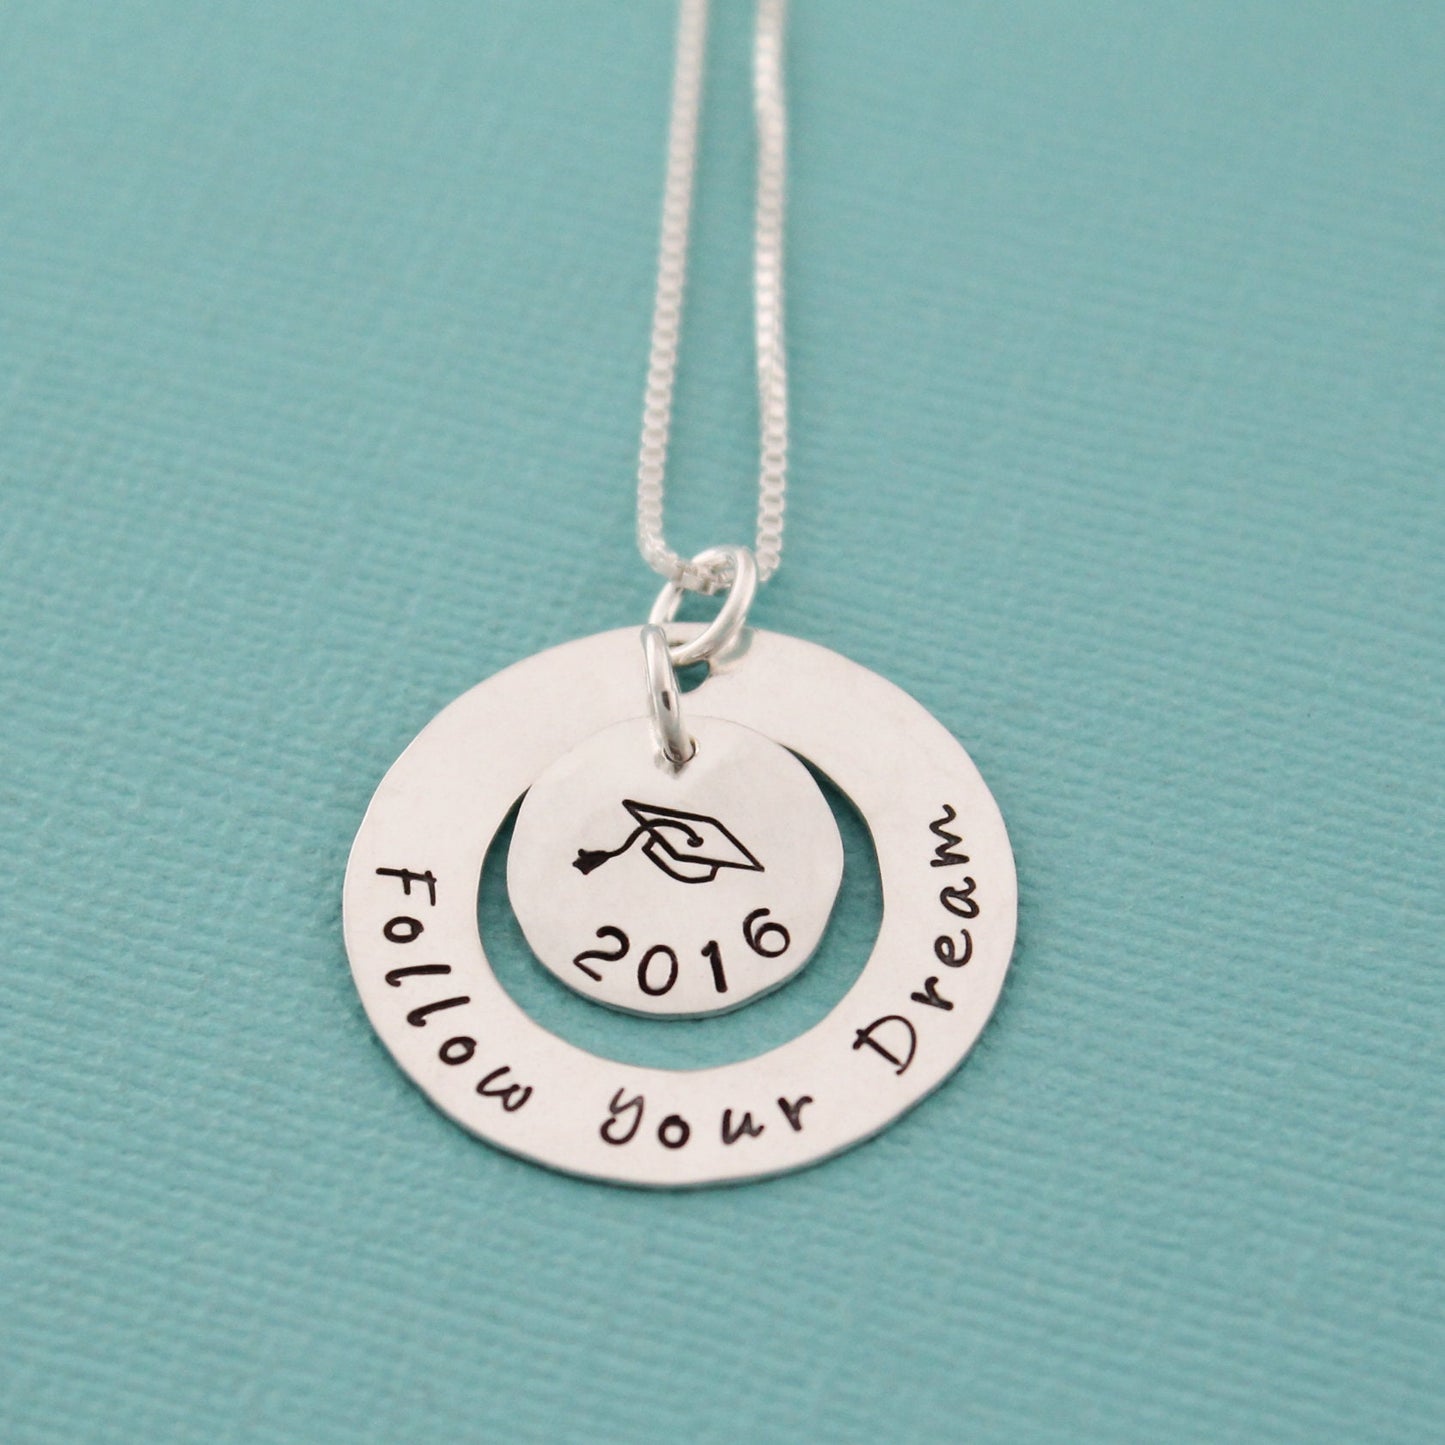 Follow Your Dream Necklace, Personalized Graduation Jewelry, Graduation Gift, Hand Stamped Necklace, Personalized Jewelry, Grad Jewelry